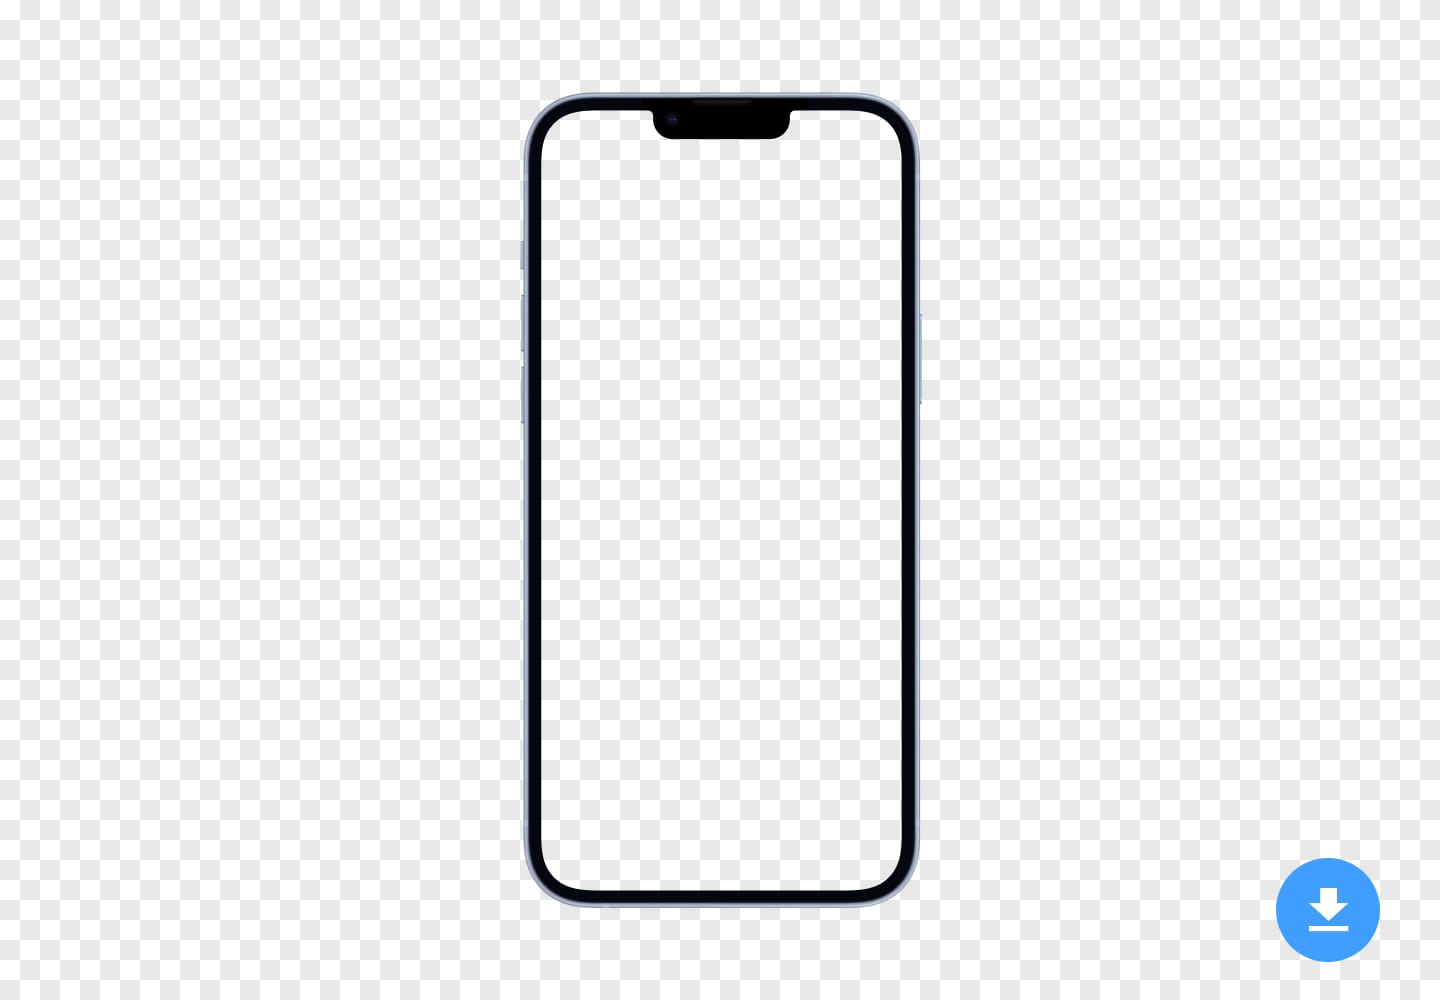 Free HD mockup of Apple iPhone 14 (2022) in PNG and PSD image format with transparent background